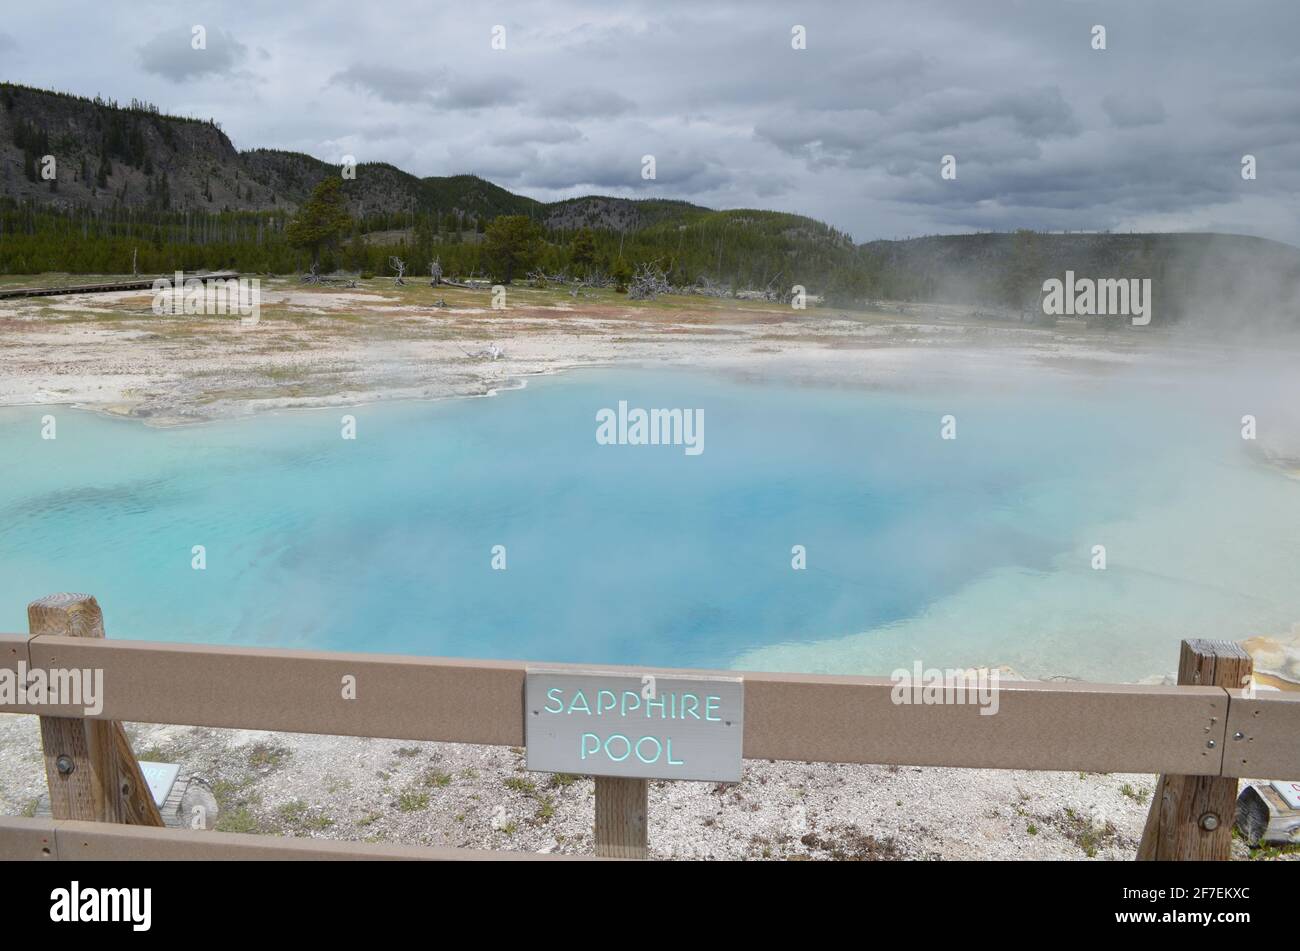 YELLOWSTONE NATIONAL PARK, WYOMING - JUNE 9, 2017: Sapphire Pool of the Sapphire Group in the Biscuit Basin Area of Upper Geyser Basin Stock Photo